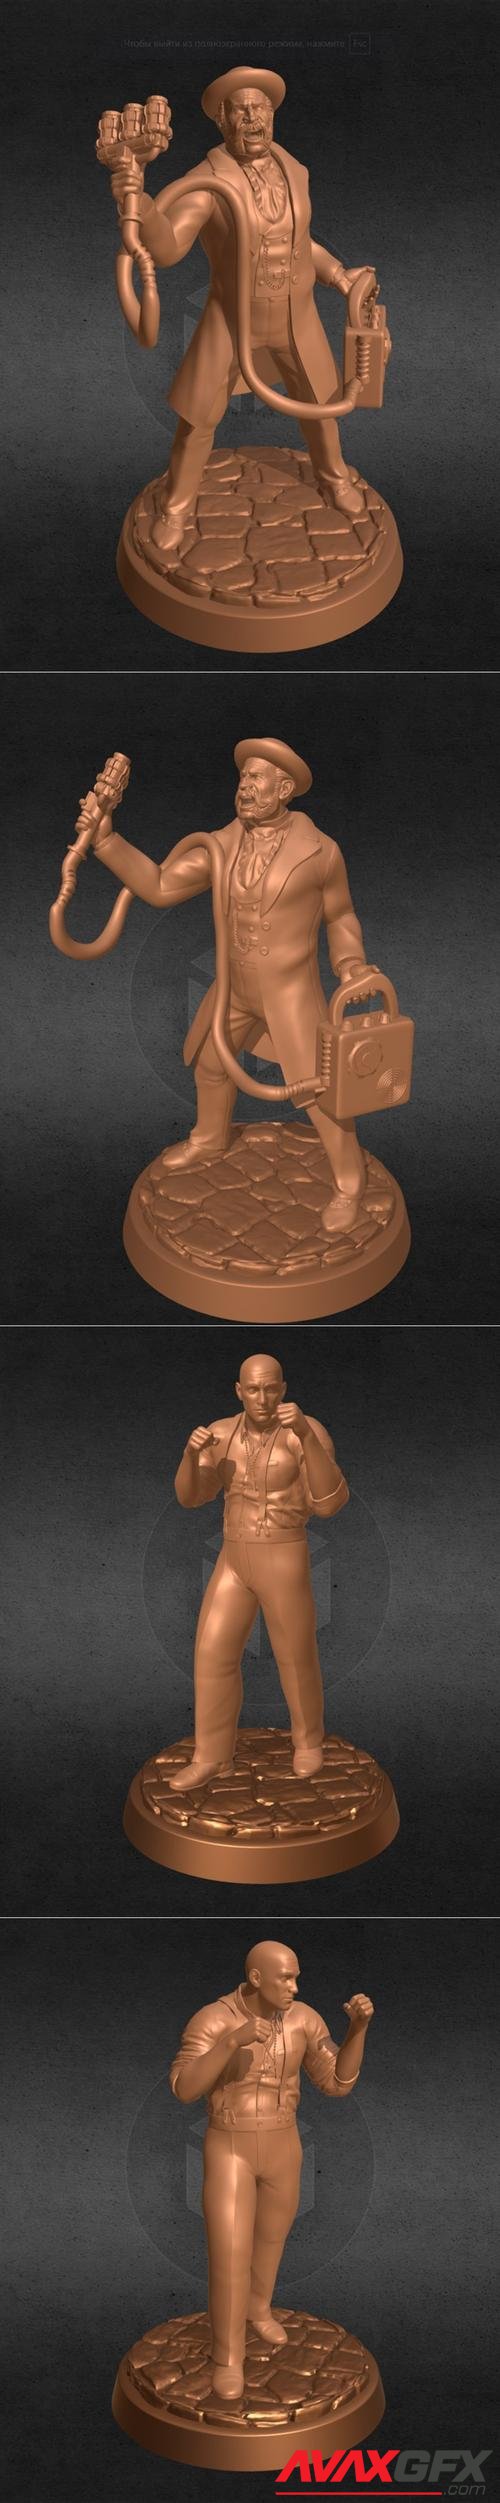 Cientist Call Of Cthulhu and Fighter Call Of Cthulhu – 3D Print